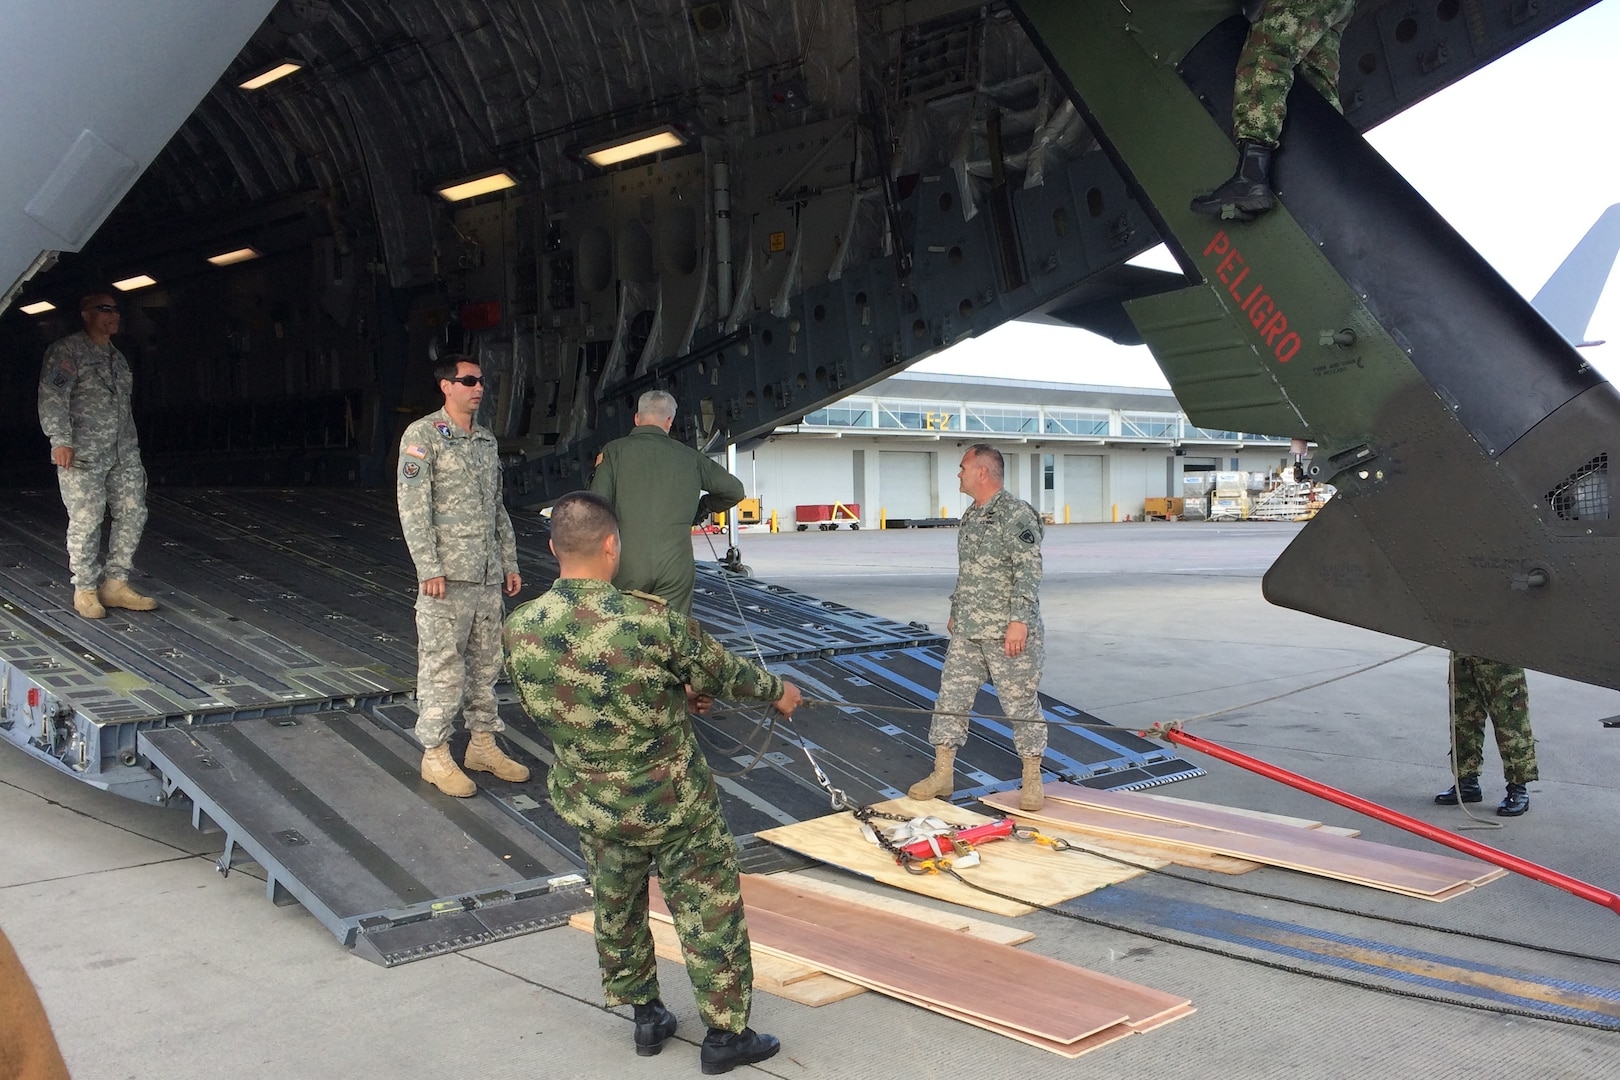 South Carolina Army National Guard Soldiers work with Colombian aviation military members to prepare a UH-60 Black Hawk to load onto a cargo aircraft. An aviation team of three subject matter experts from the S.C. Army National Guard was in Colombia April 1-7, 2014, in support of the State Partnership Program.
